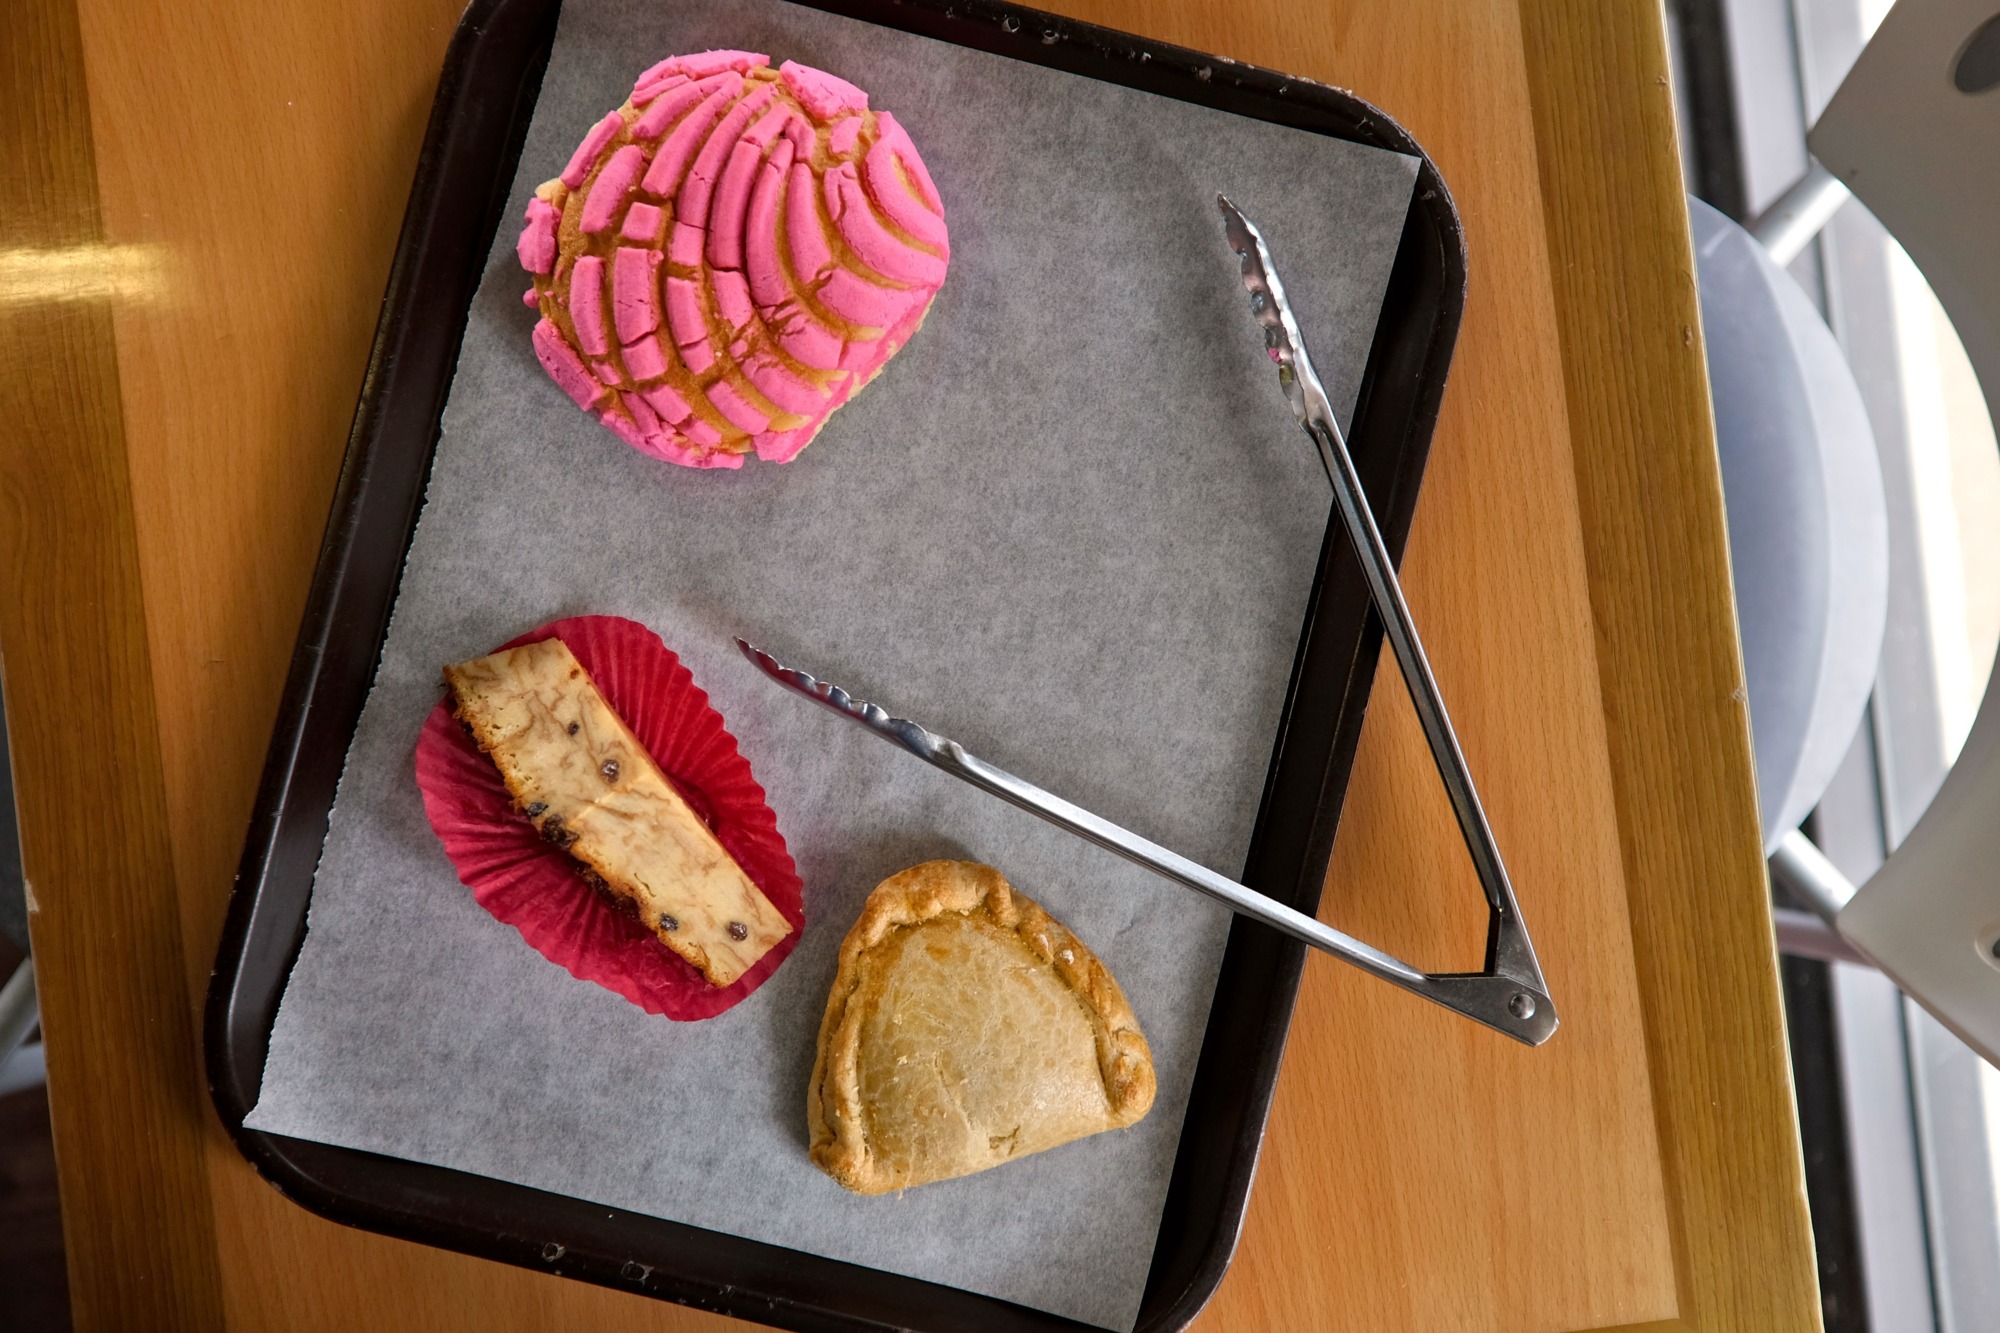 A tray with pastries and tongs